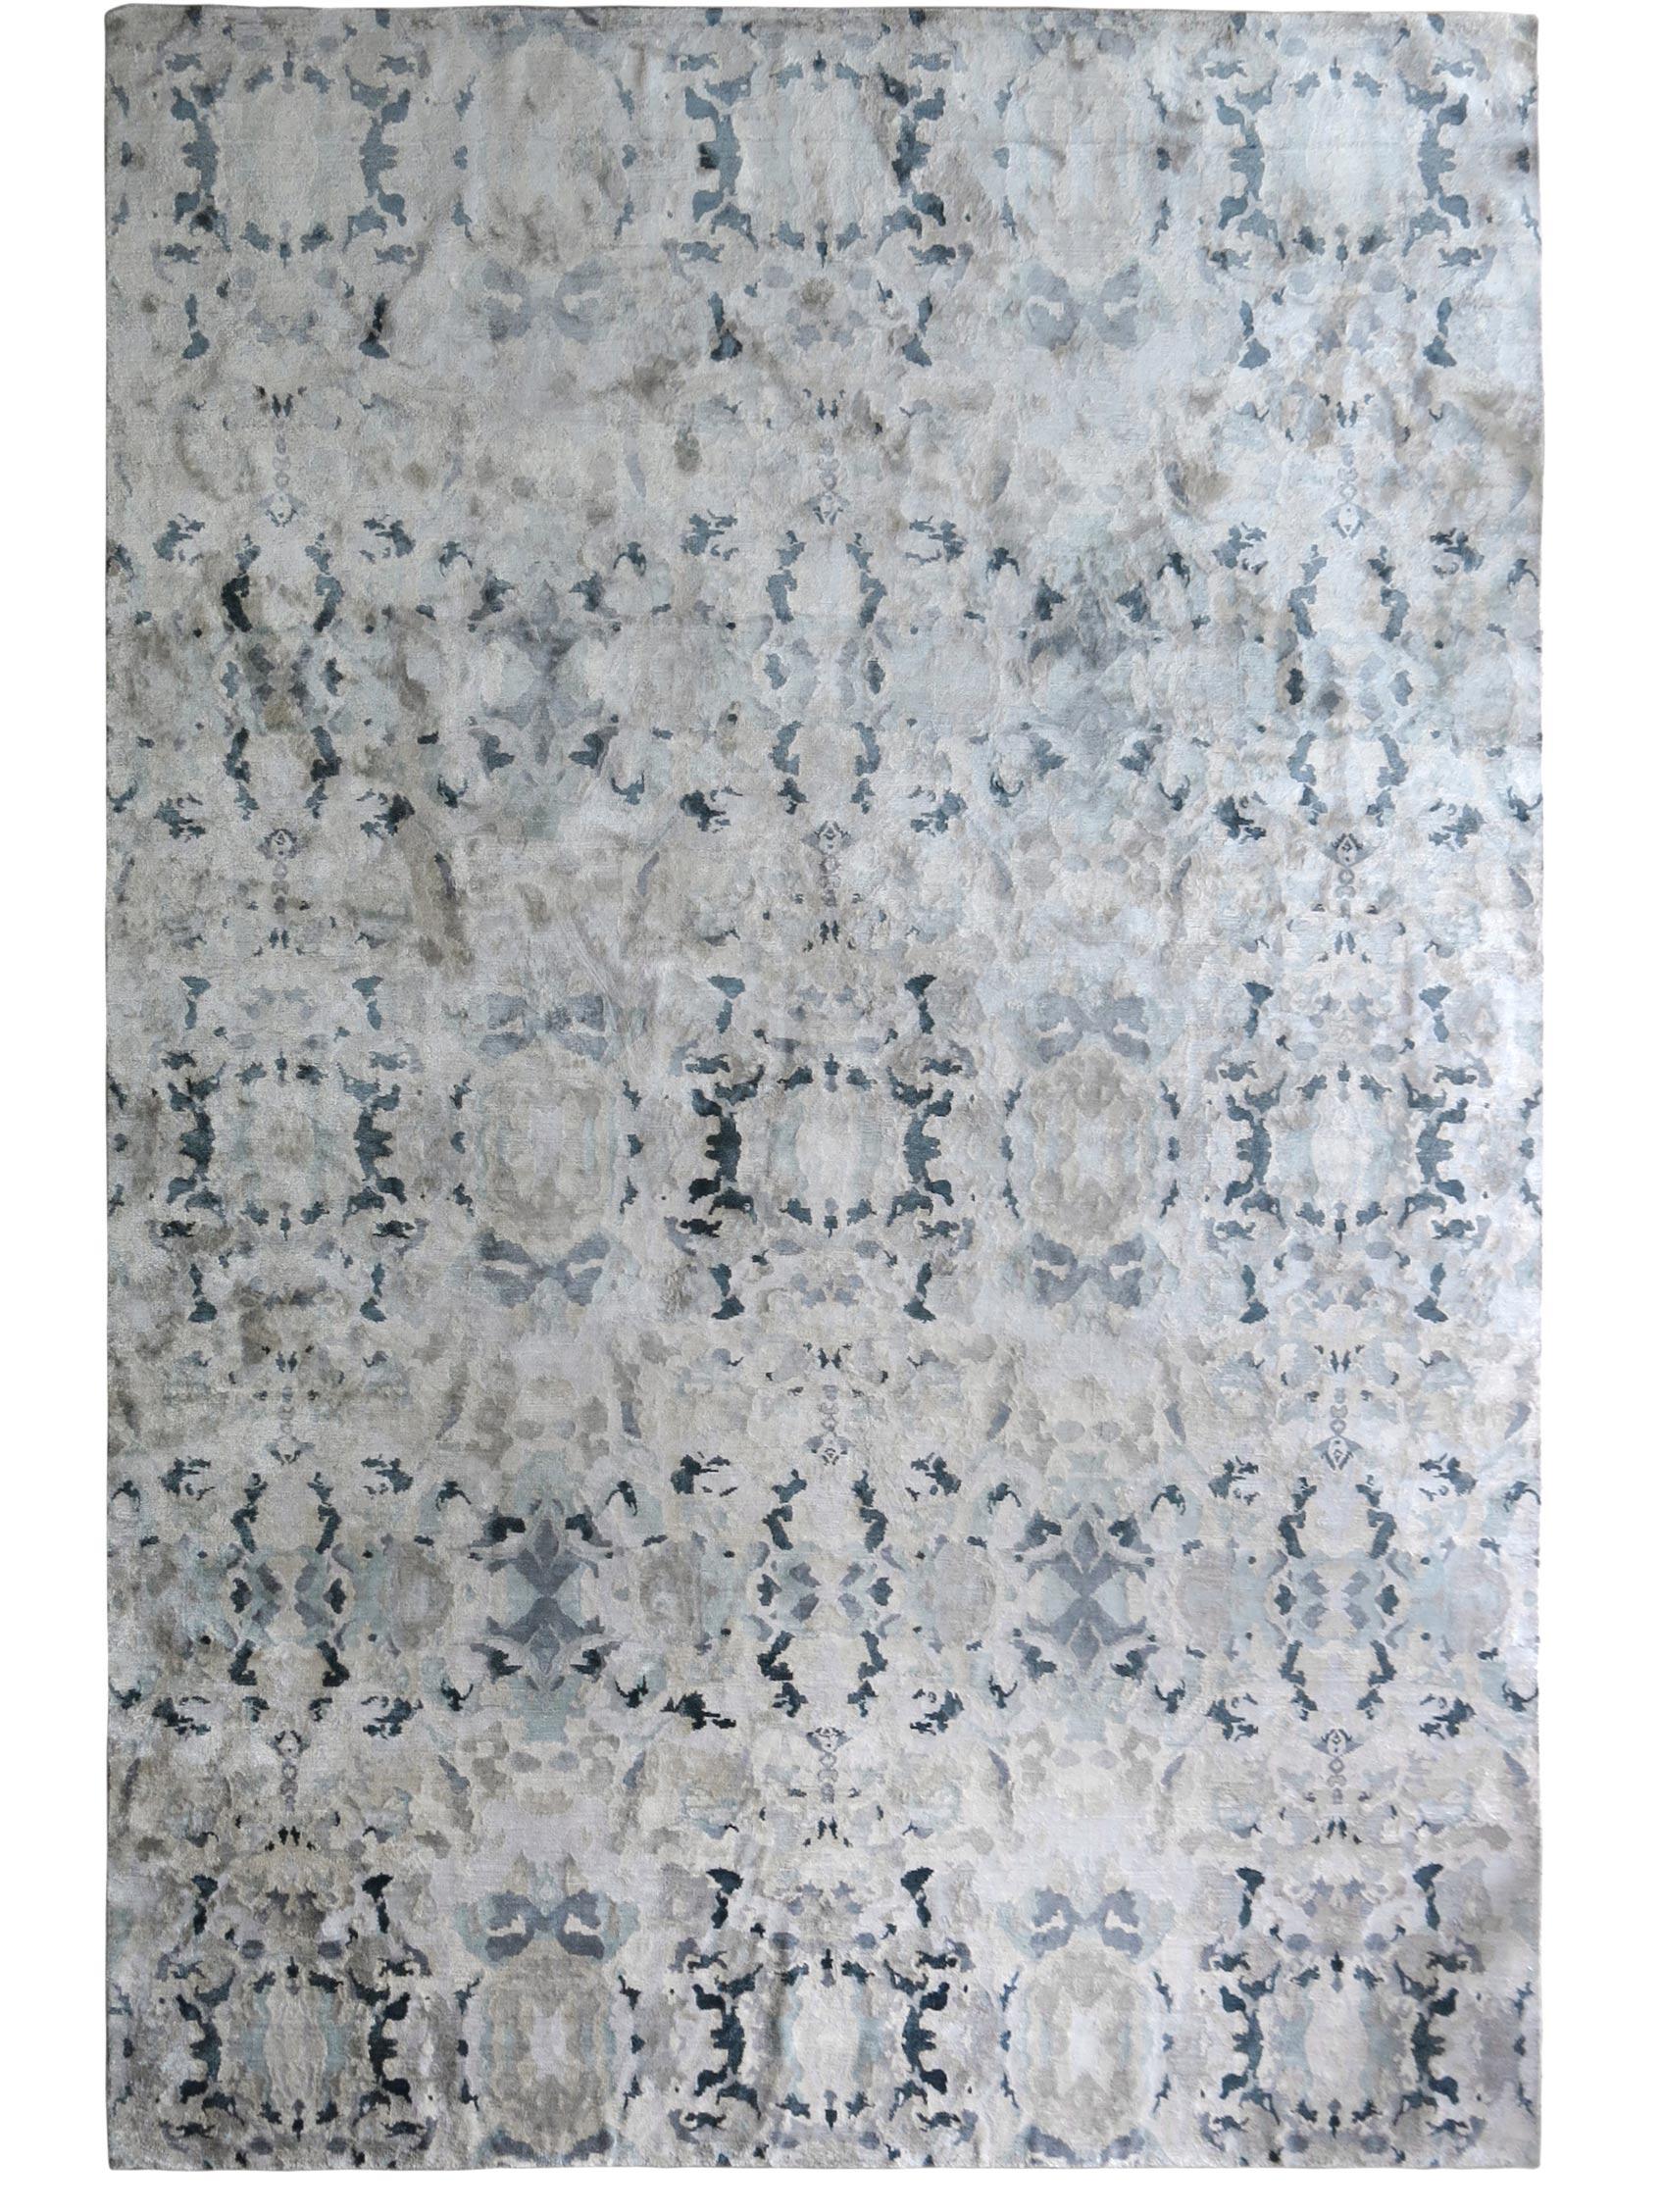 Bosky Toile Midnight Hand-Knotted Rug by Eskayel.
Dimensions: D8' x H10'.
Pile Height: 4 mm.
Materials: New Zealand wool and silk.

Eskayel hand-knotted rugs are woven to order and can be customized in various sizes, colors, materials, and